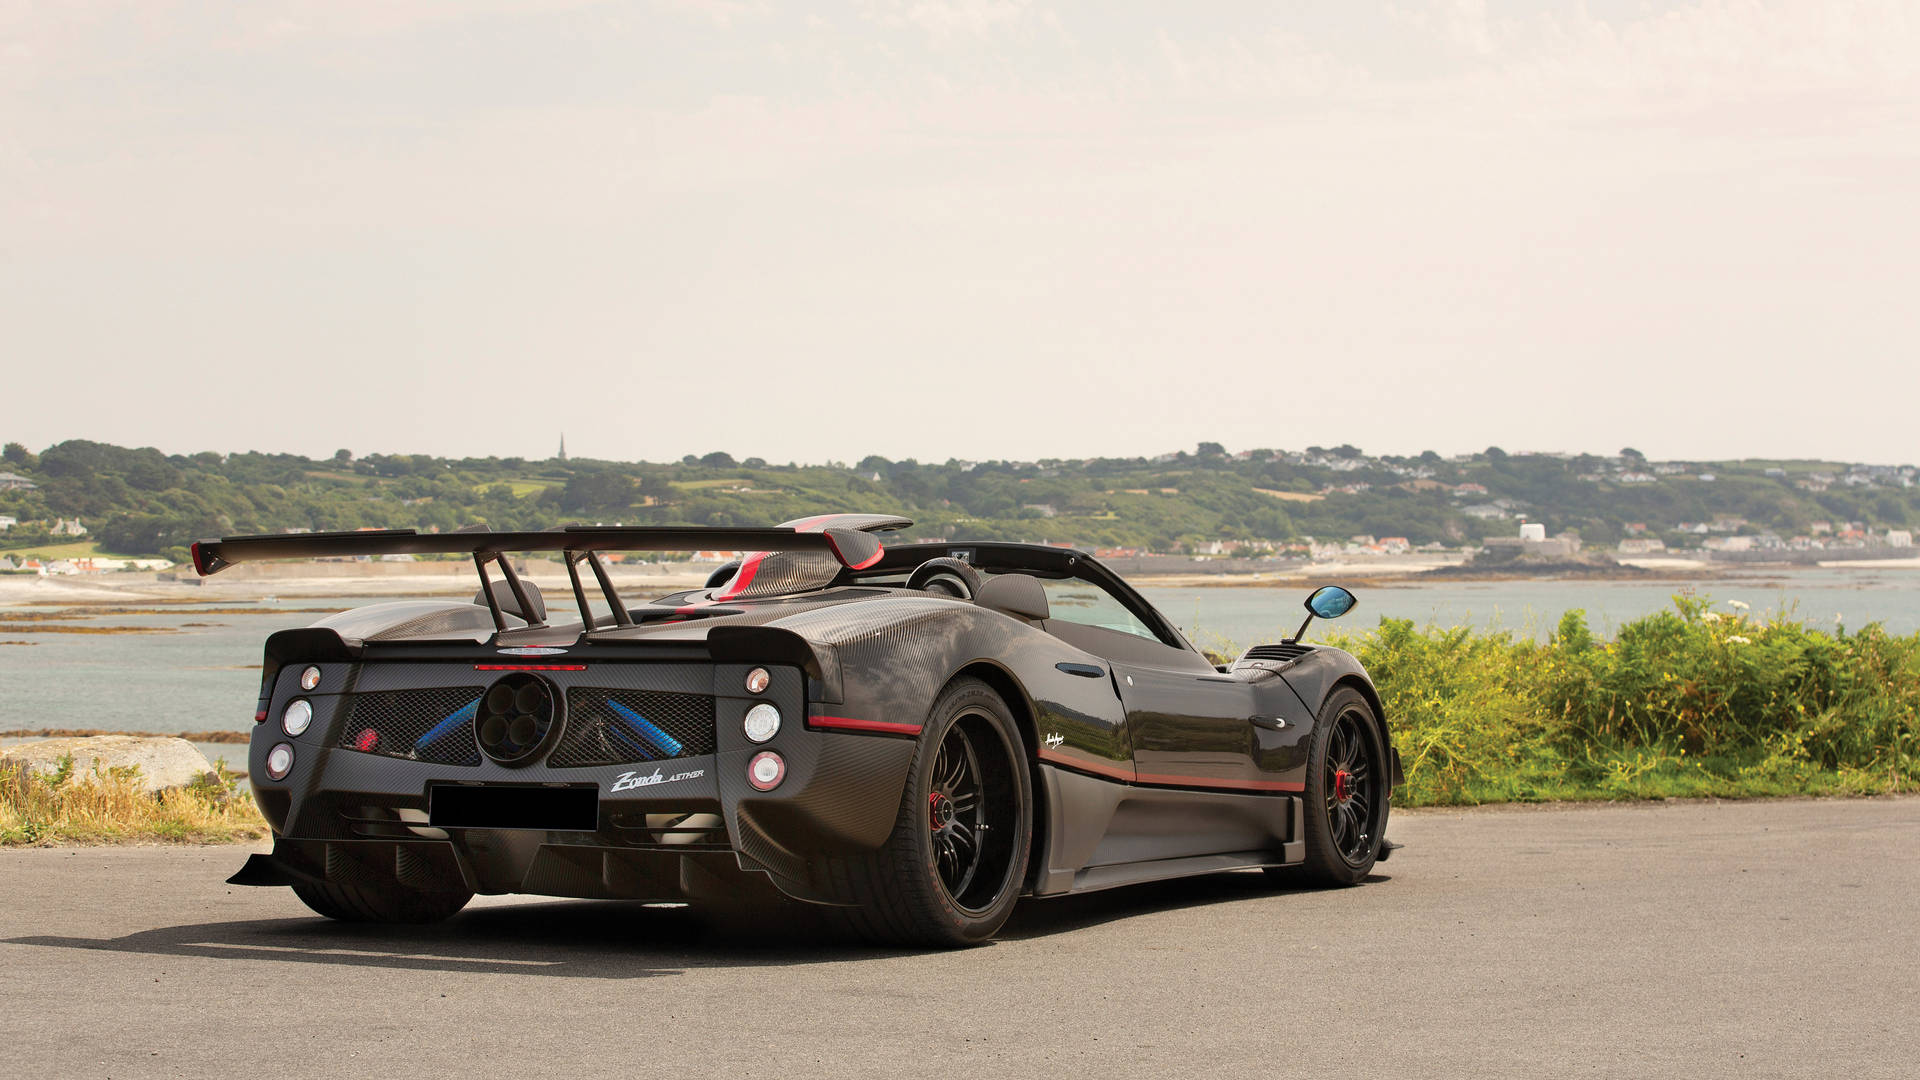 Supercar Zonda Ather Pagani From Iphone